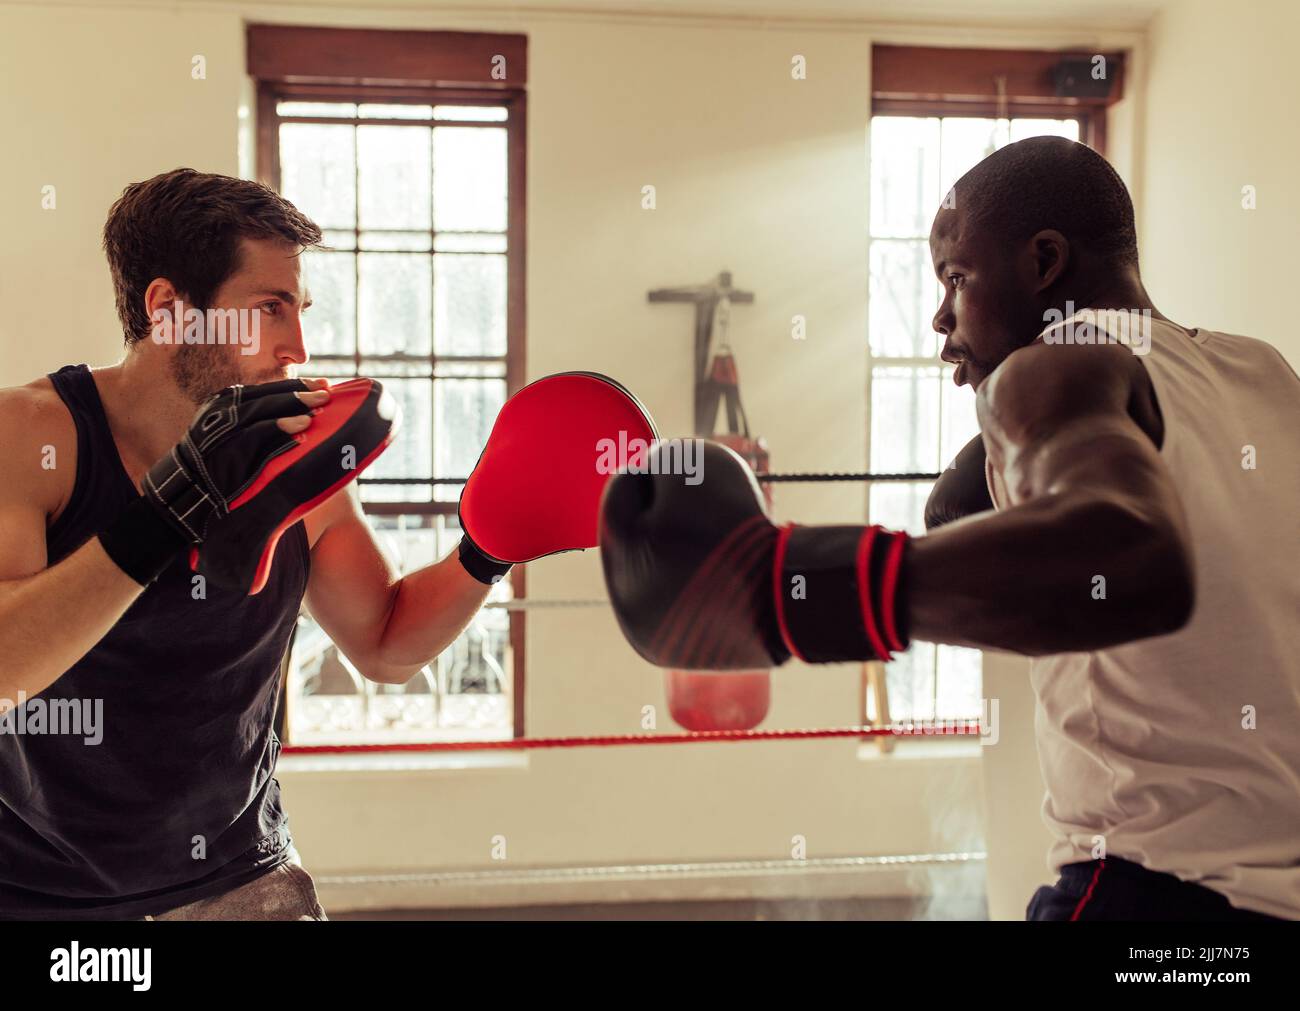 Young boxing coach training a young boxer with focus pads in a gym. Physical trainer teaching a young boxer punching techniques in a boxing ring. Stock Photo